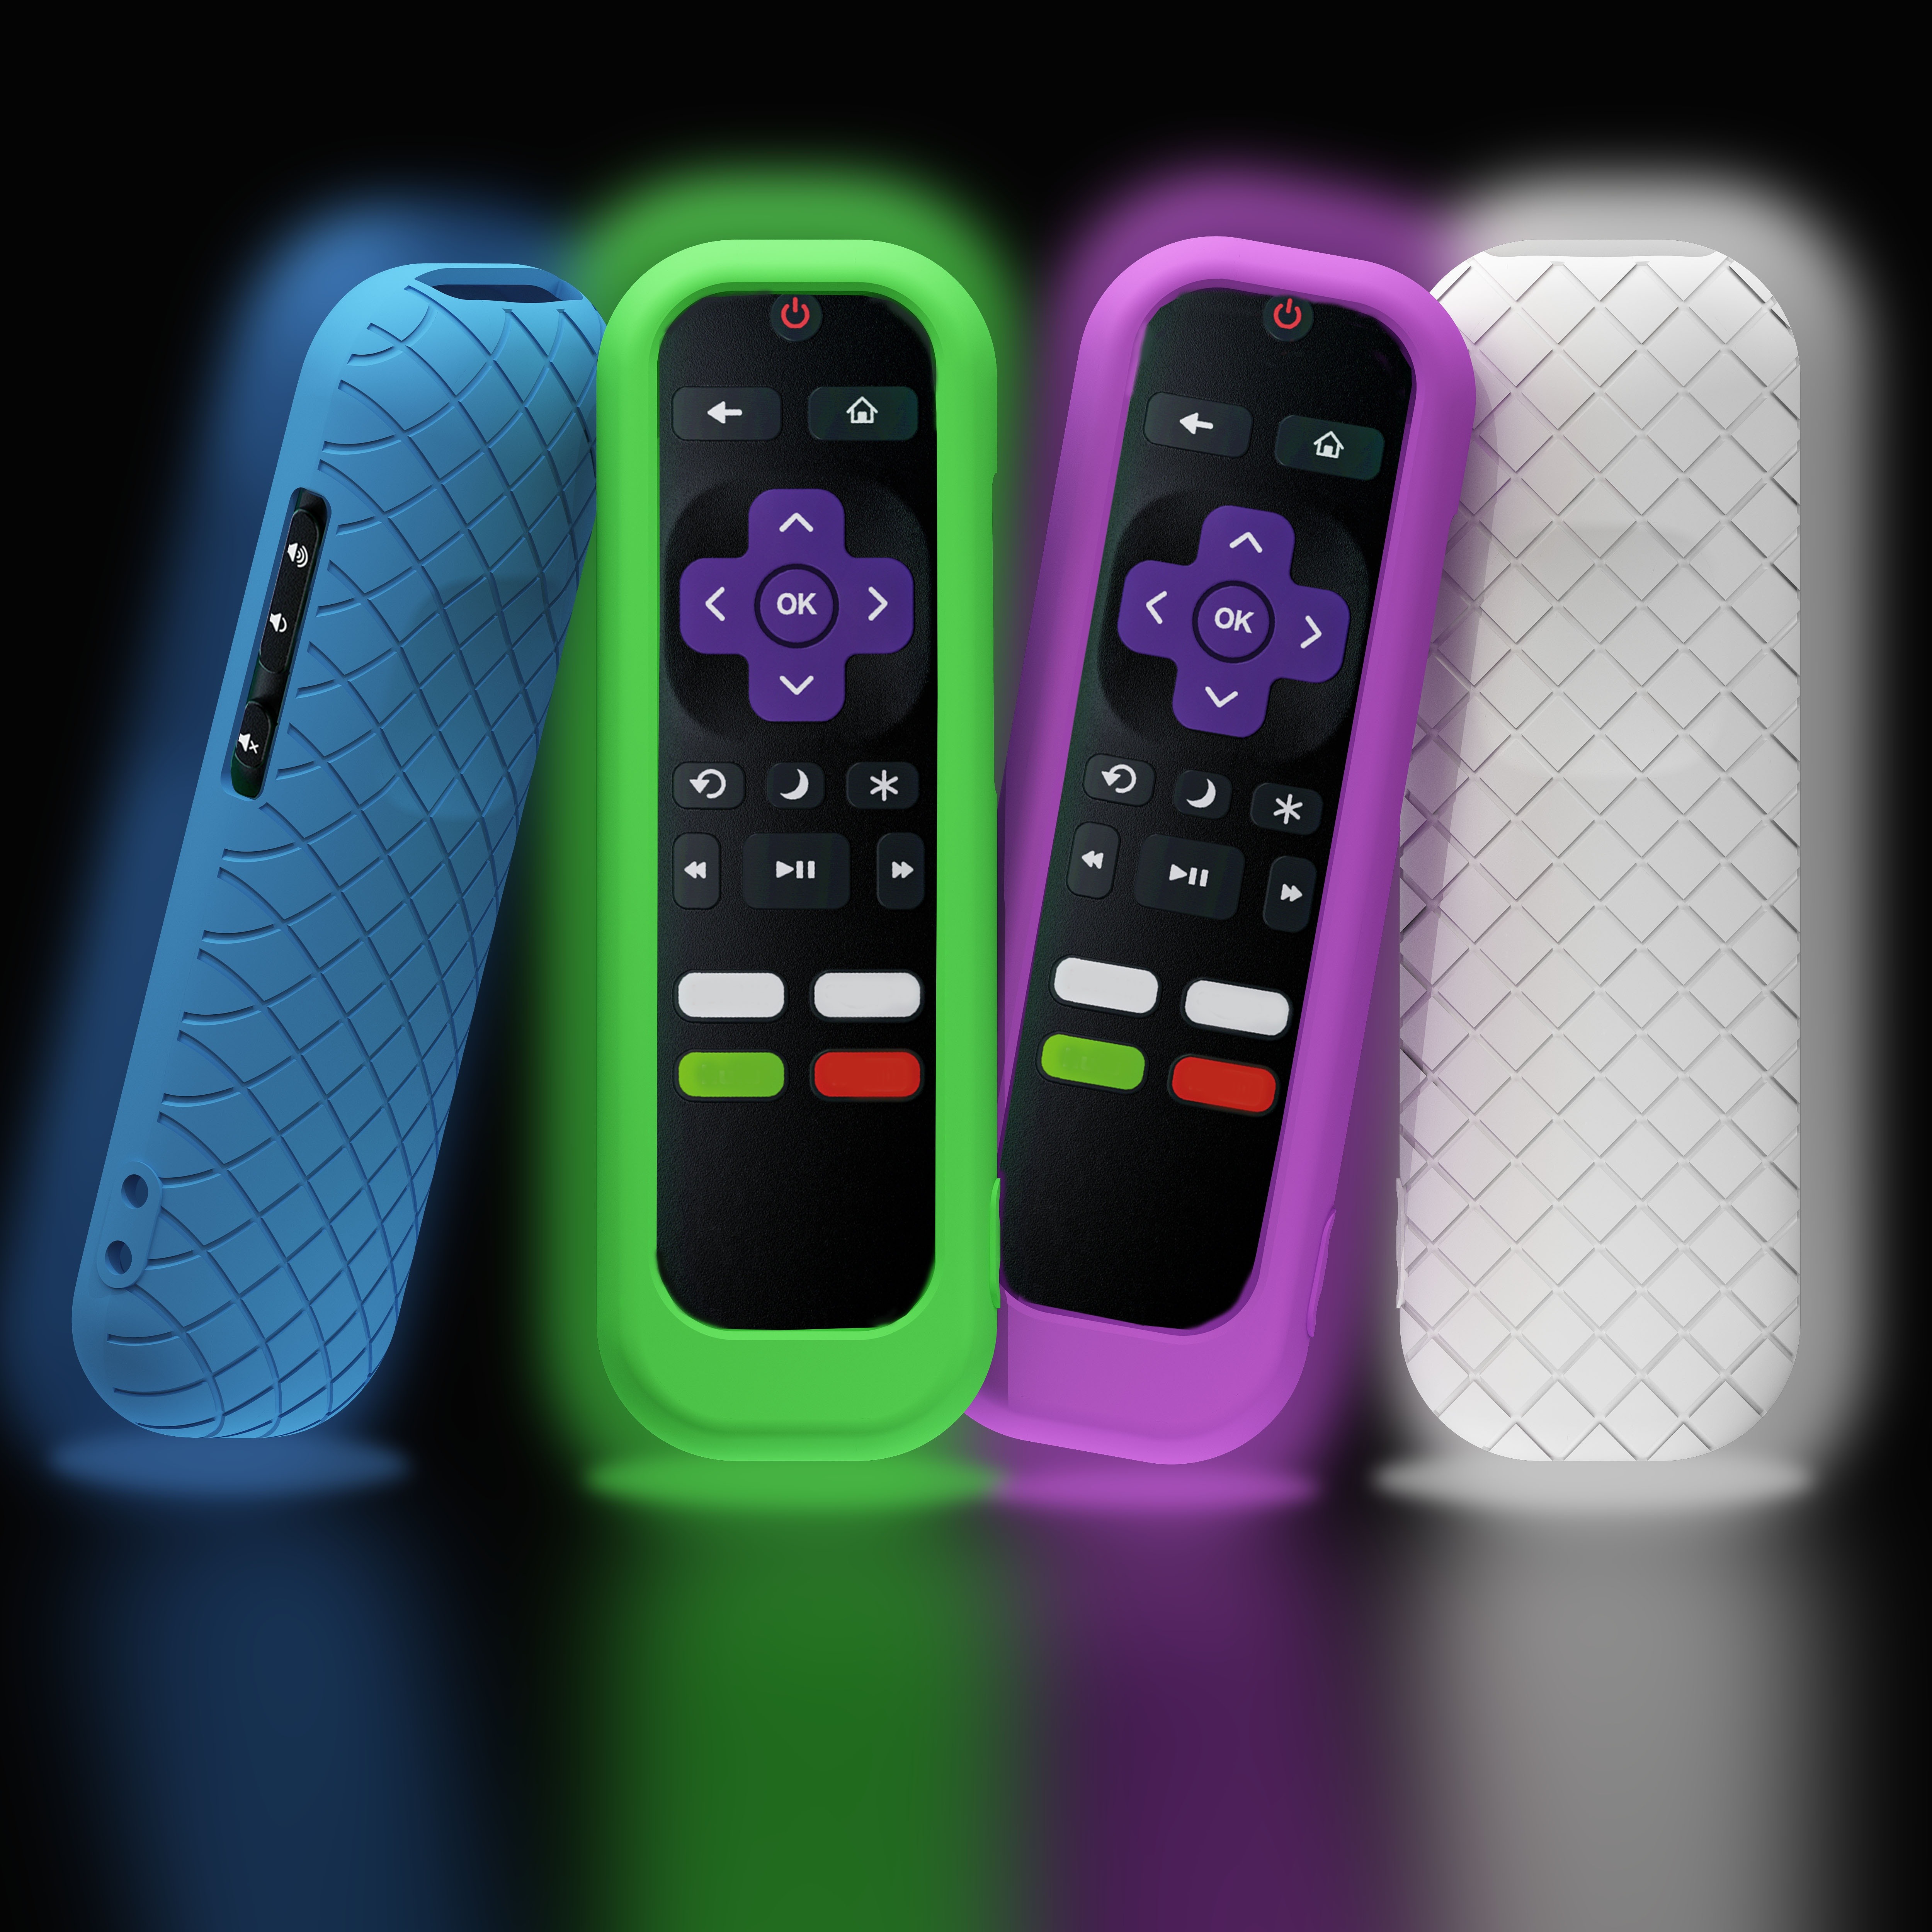 

Glow In The Dark Remote Cover For Tv Remote Control - Universal Silicone Sleeve Case For Tcl Hisense, Tv Streaming Stick, 4k+/ 4k Voice Remote